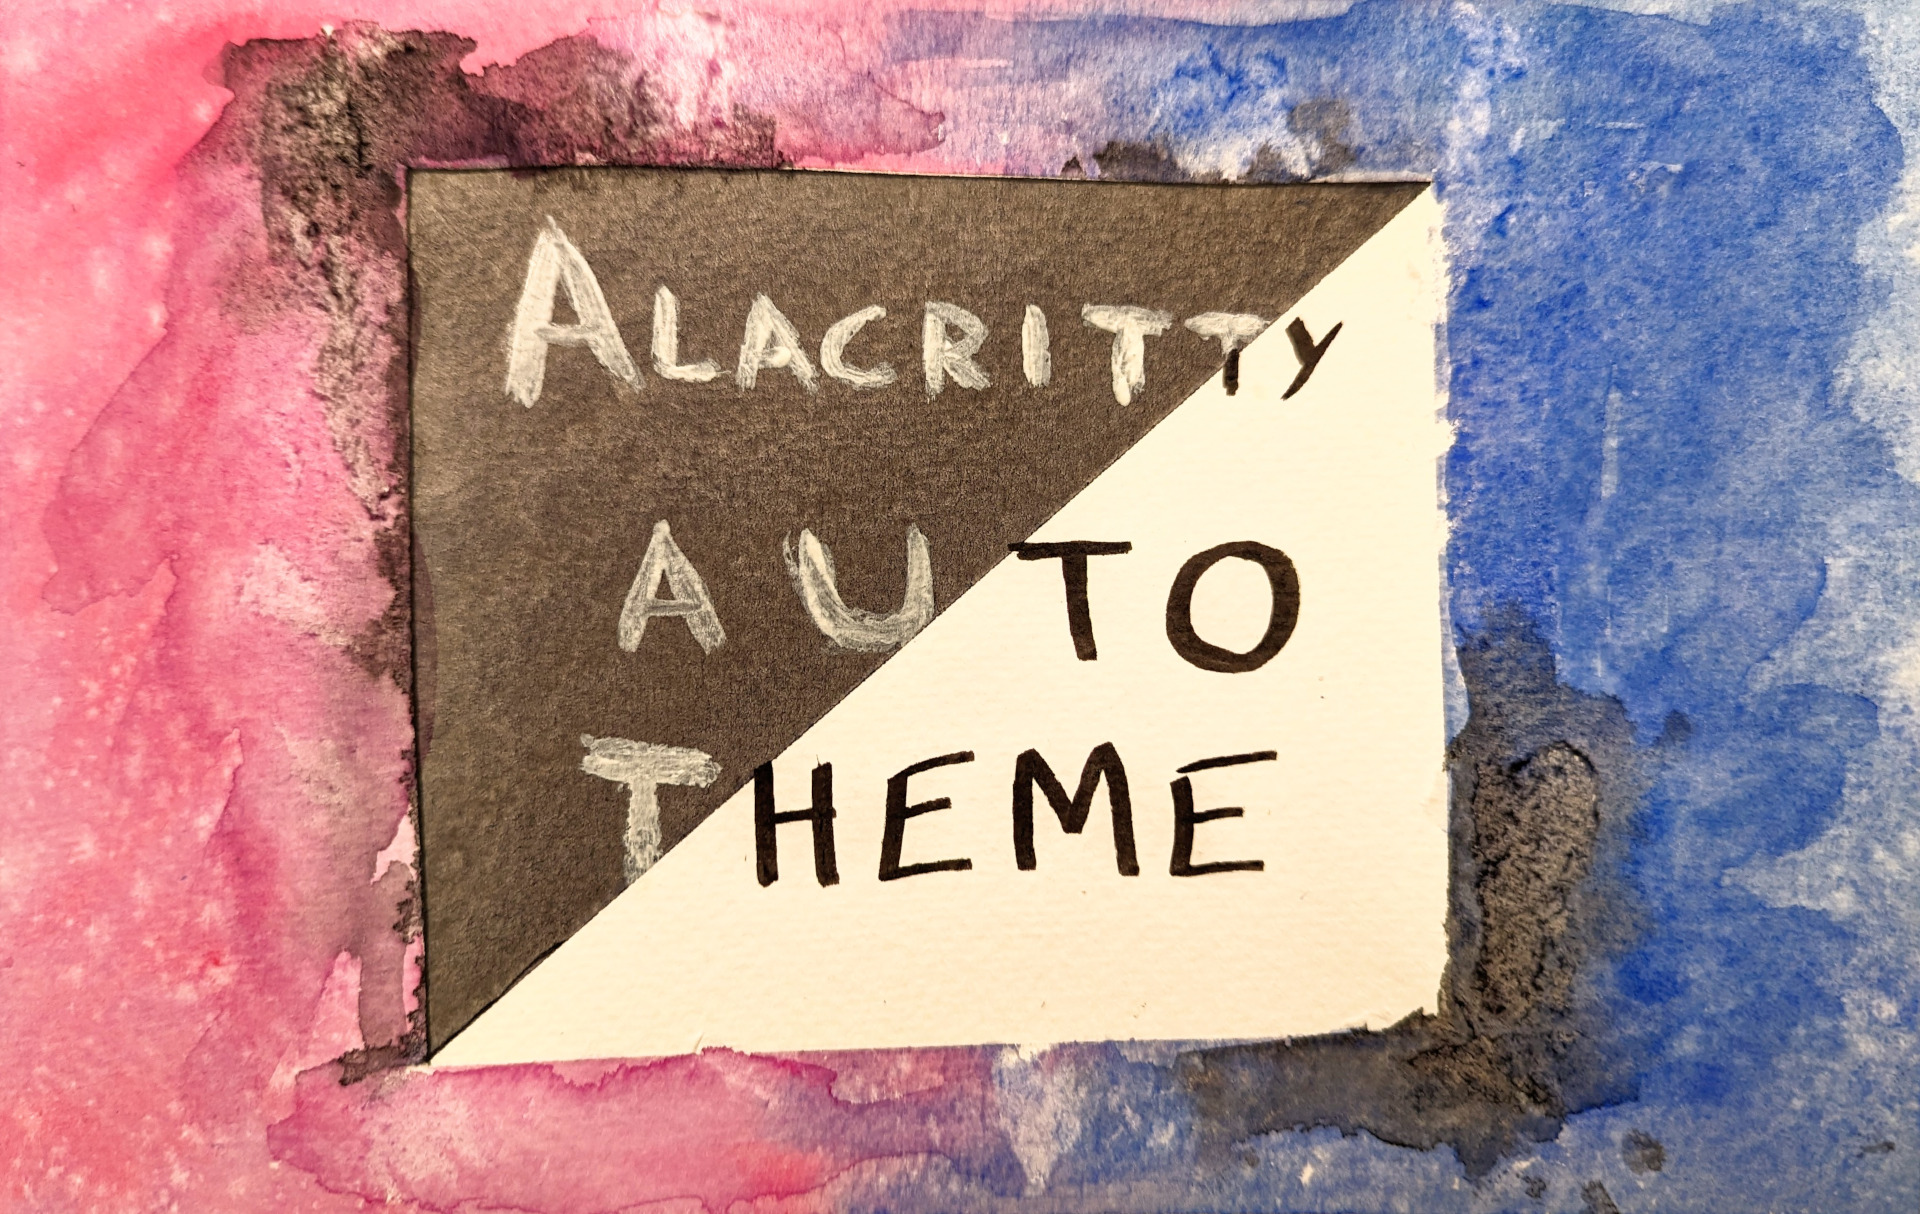 A watercolor painting with a pink/blue swirly border around a rectangle split along the diagonal with the left being black and the right being white. The text reads 'Alacritty Auto Theme' in the inverse color of the background.